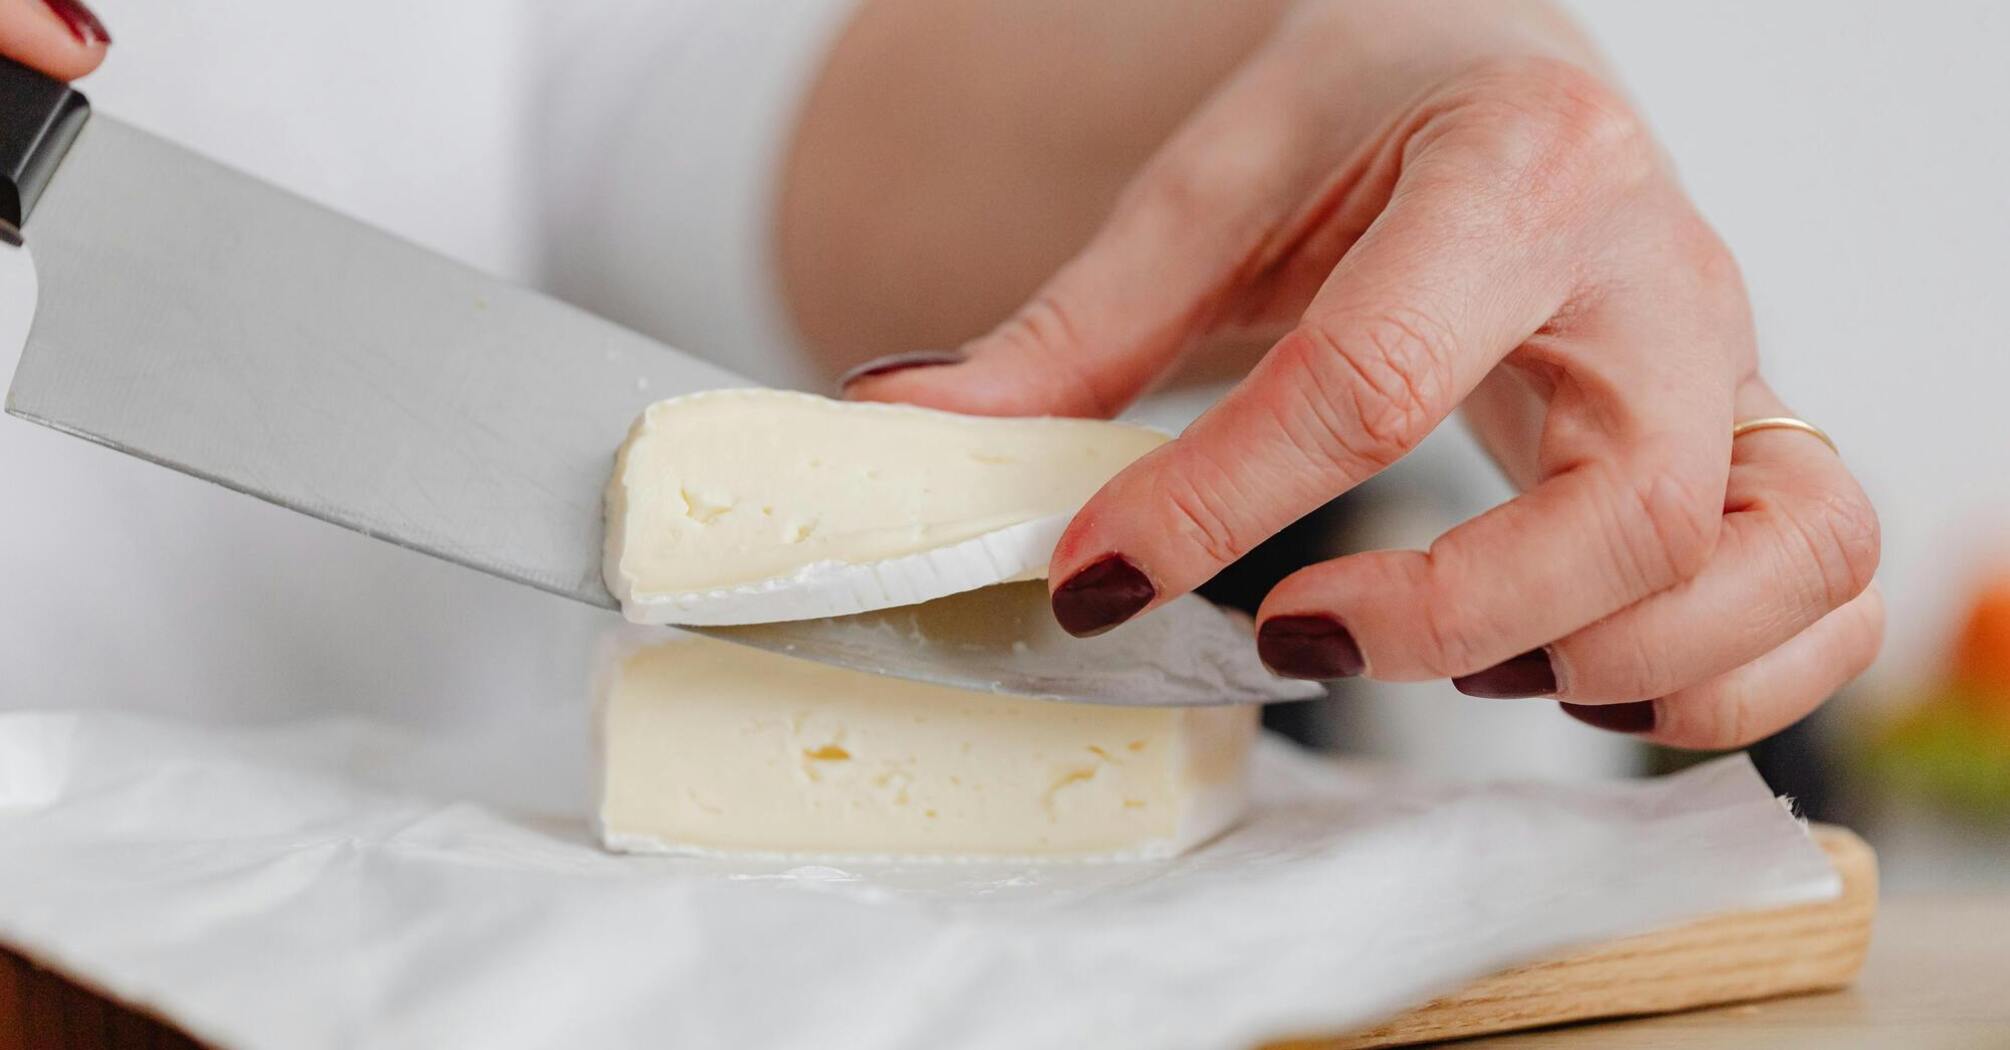 5 ways to grate soft cheese without sticking